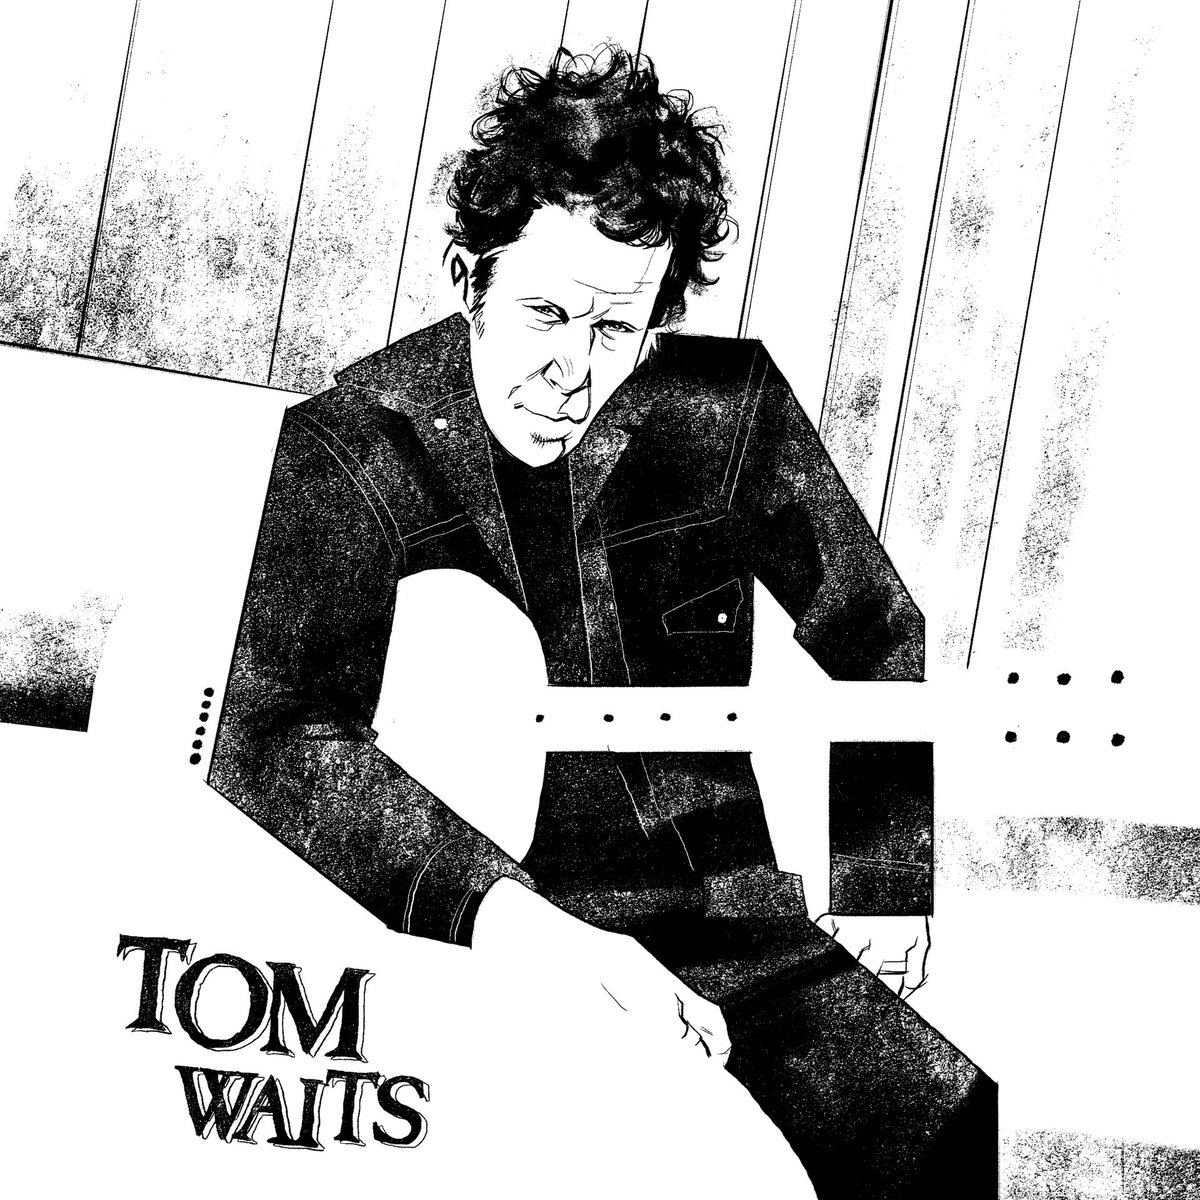 Inktober Day 11: Tom Waits
Favorite Songs: Martha, Tango Till They're Sore, Hang Down Your Head, Ol' 55

@tomwaits #inktober #inktober2019 #illustration #tomwaits #music 